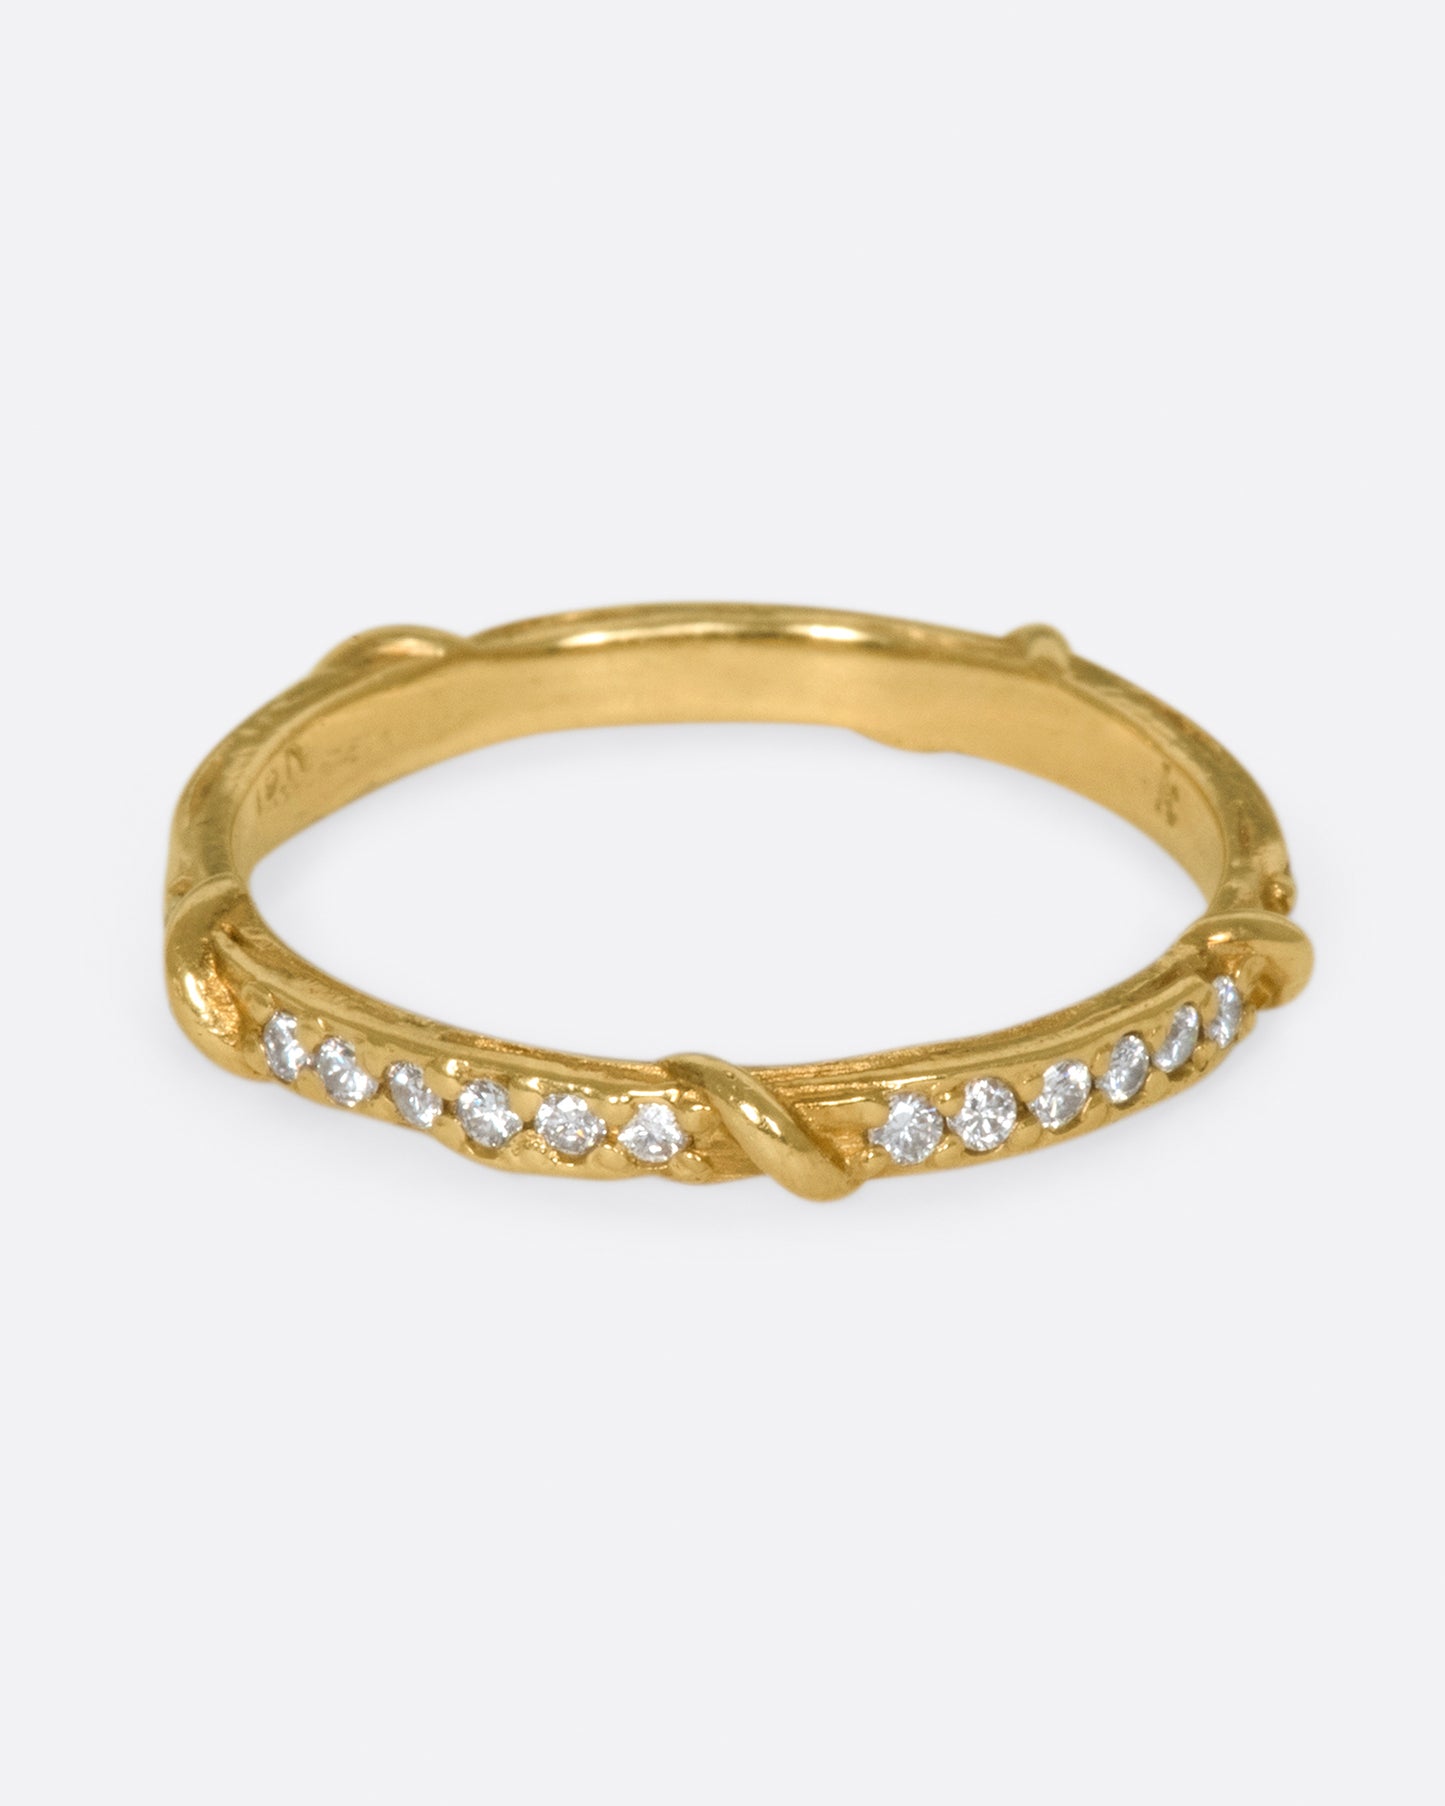 Studded halfway around with diamonds, this band is a twist on a classic with an organic edge.